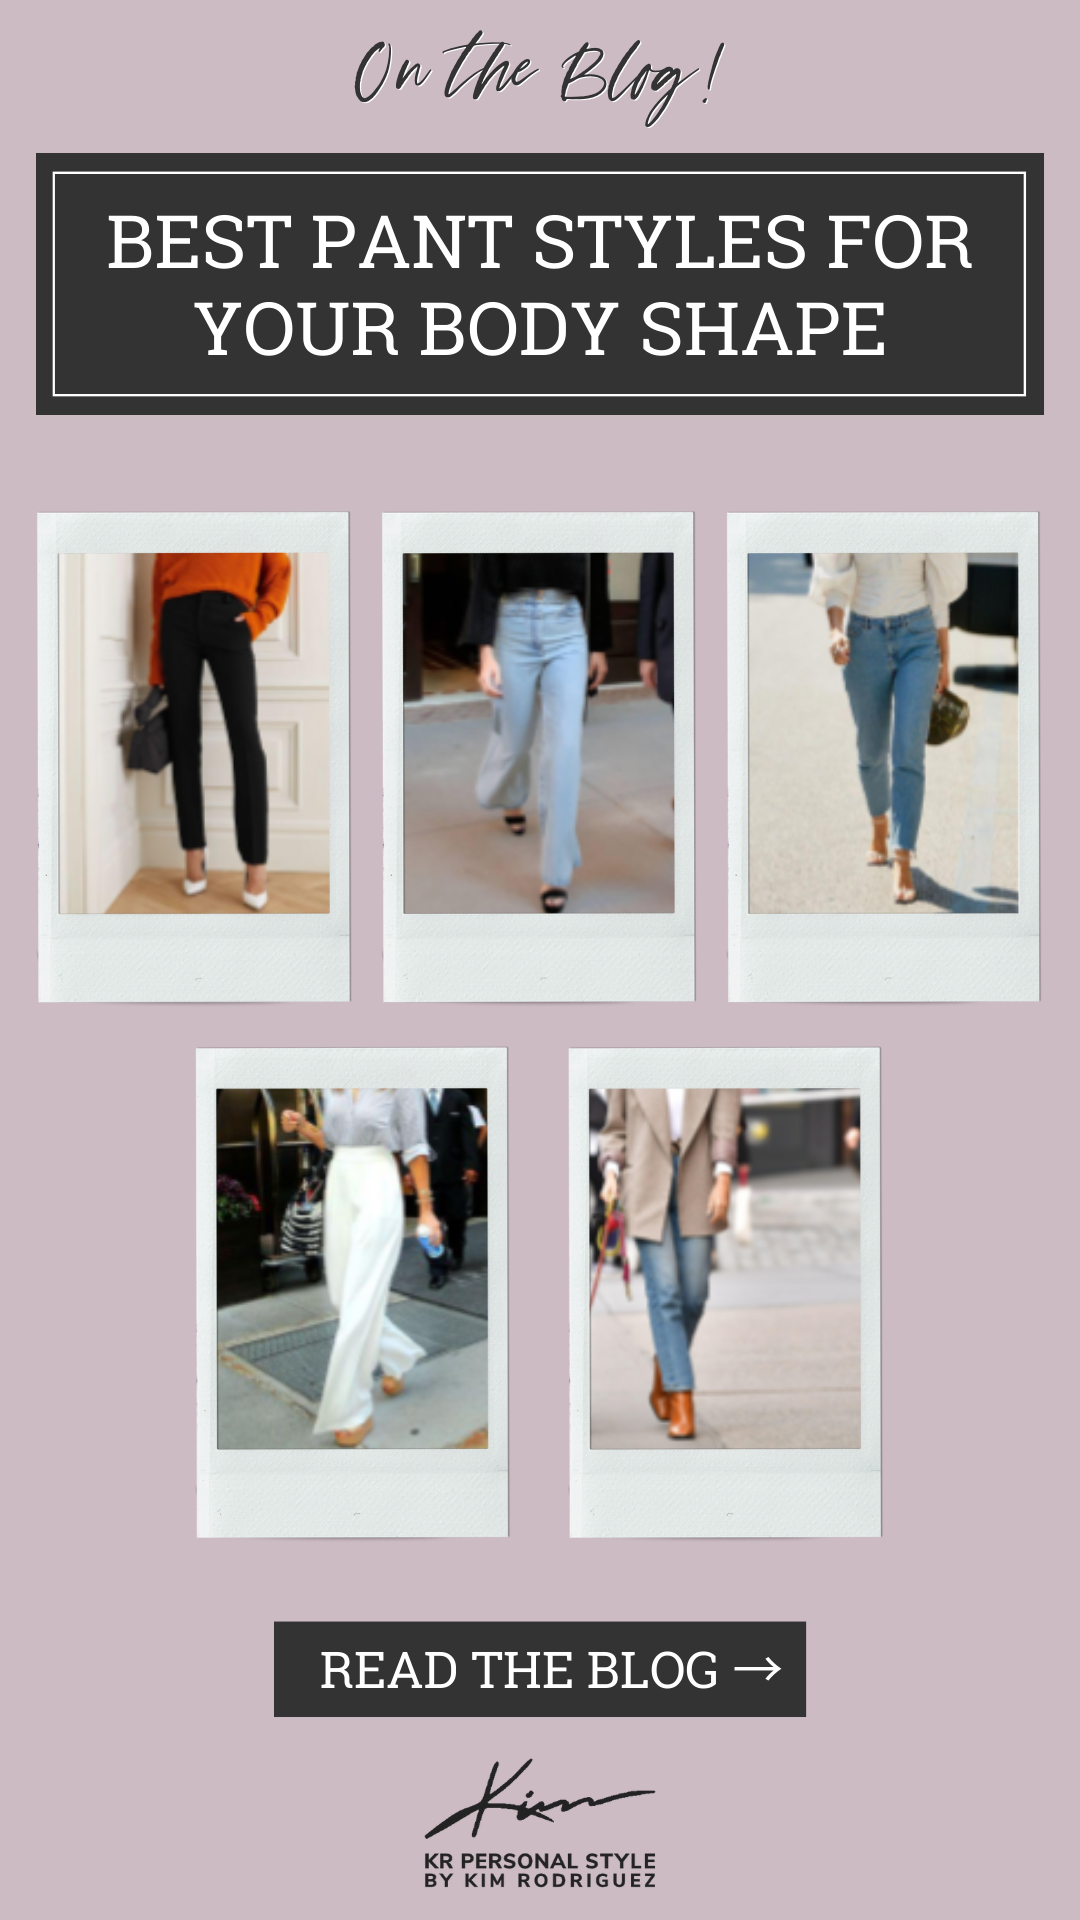 What are peg trousers? - Quora